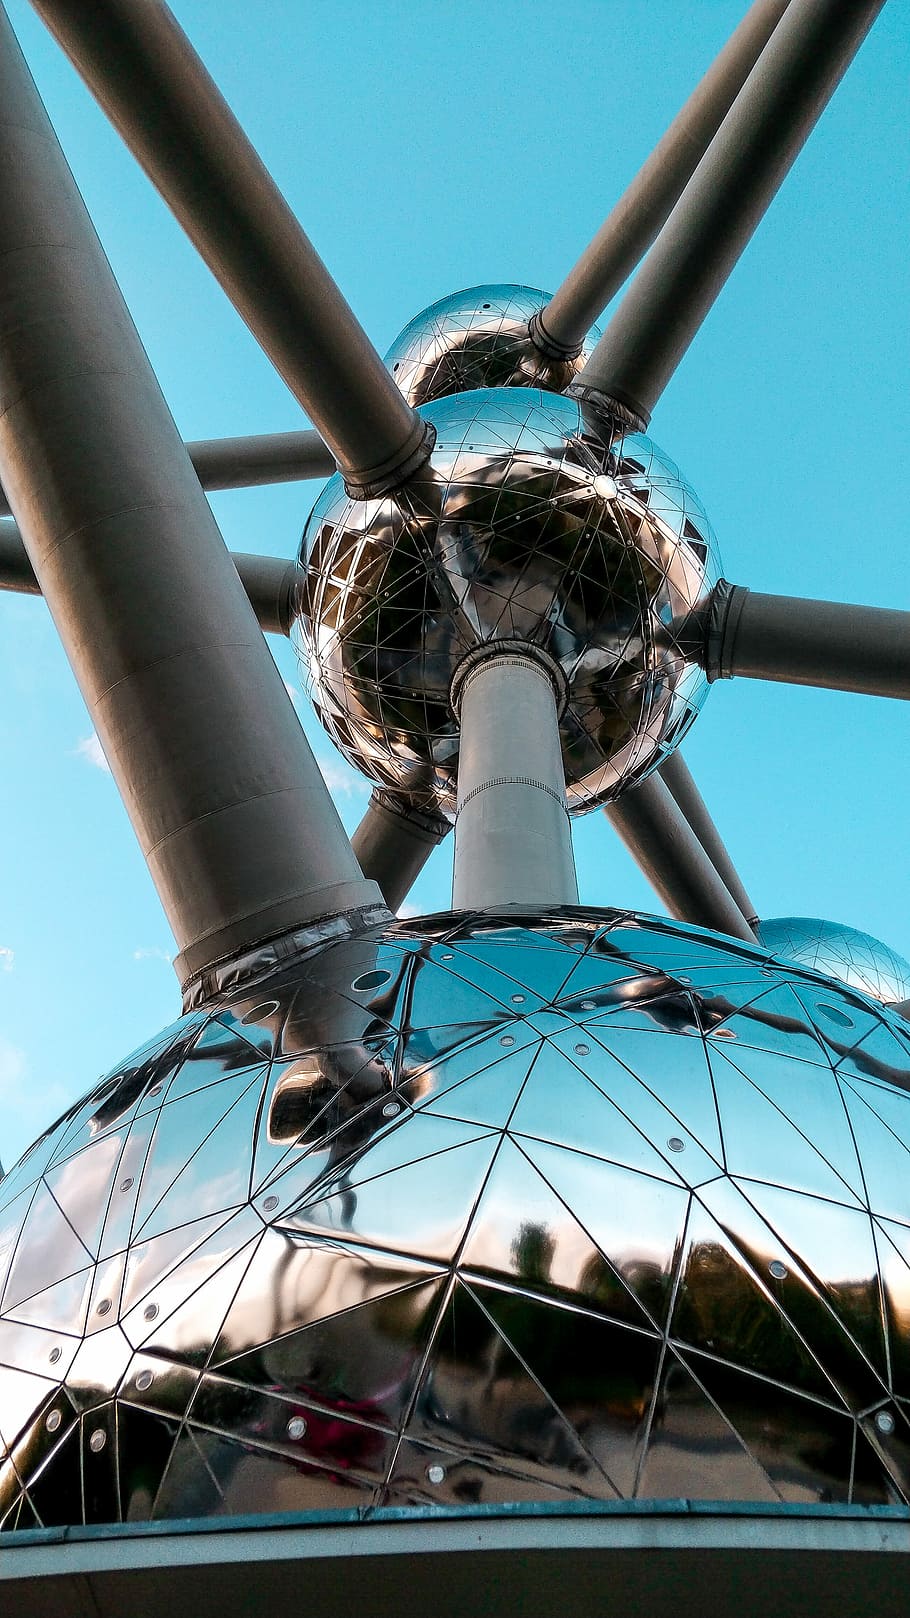 silver-colored spherical structure with attached gray pipes under blue sky, worms eye view photography of atomium landmark, HD wallpaper